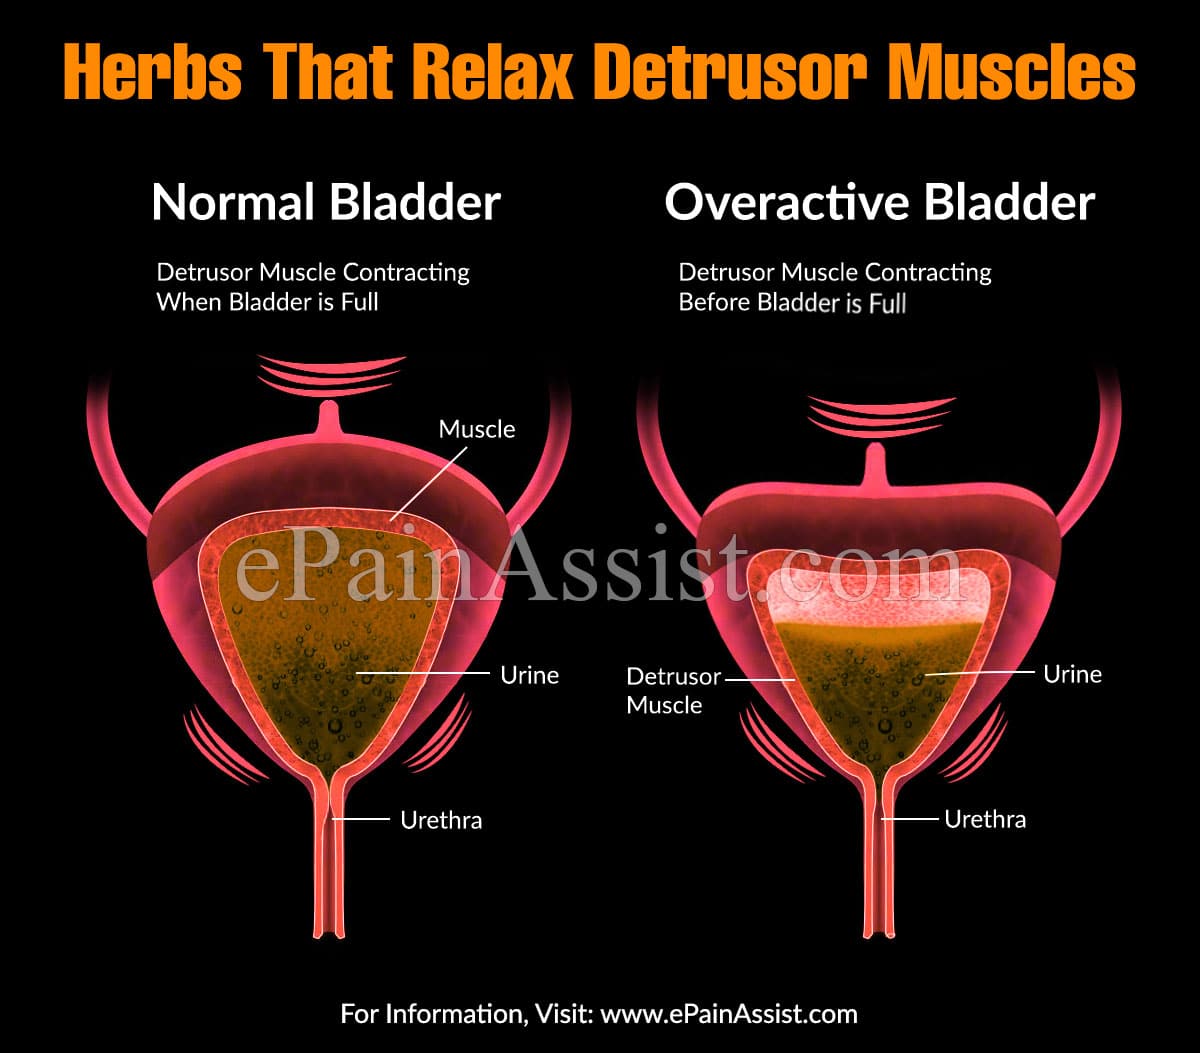 Herbs That Relax Detrusor Muscles